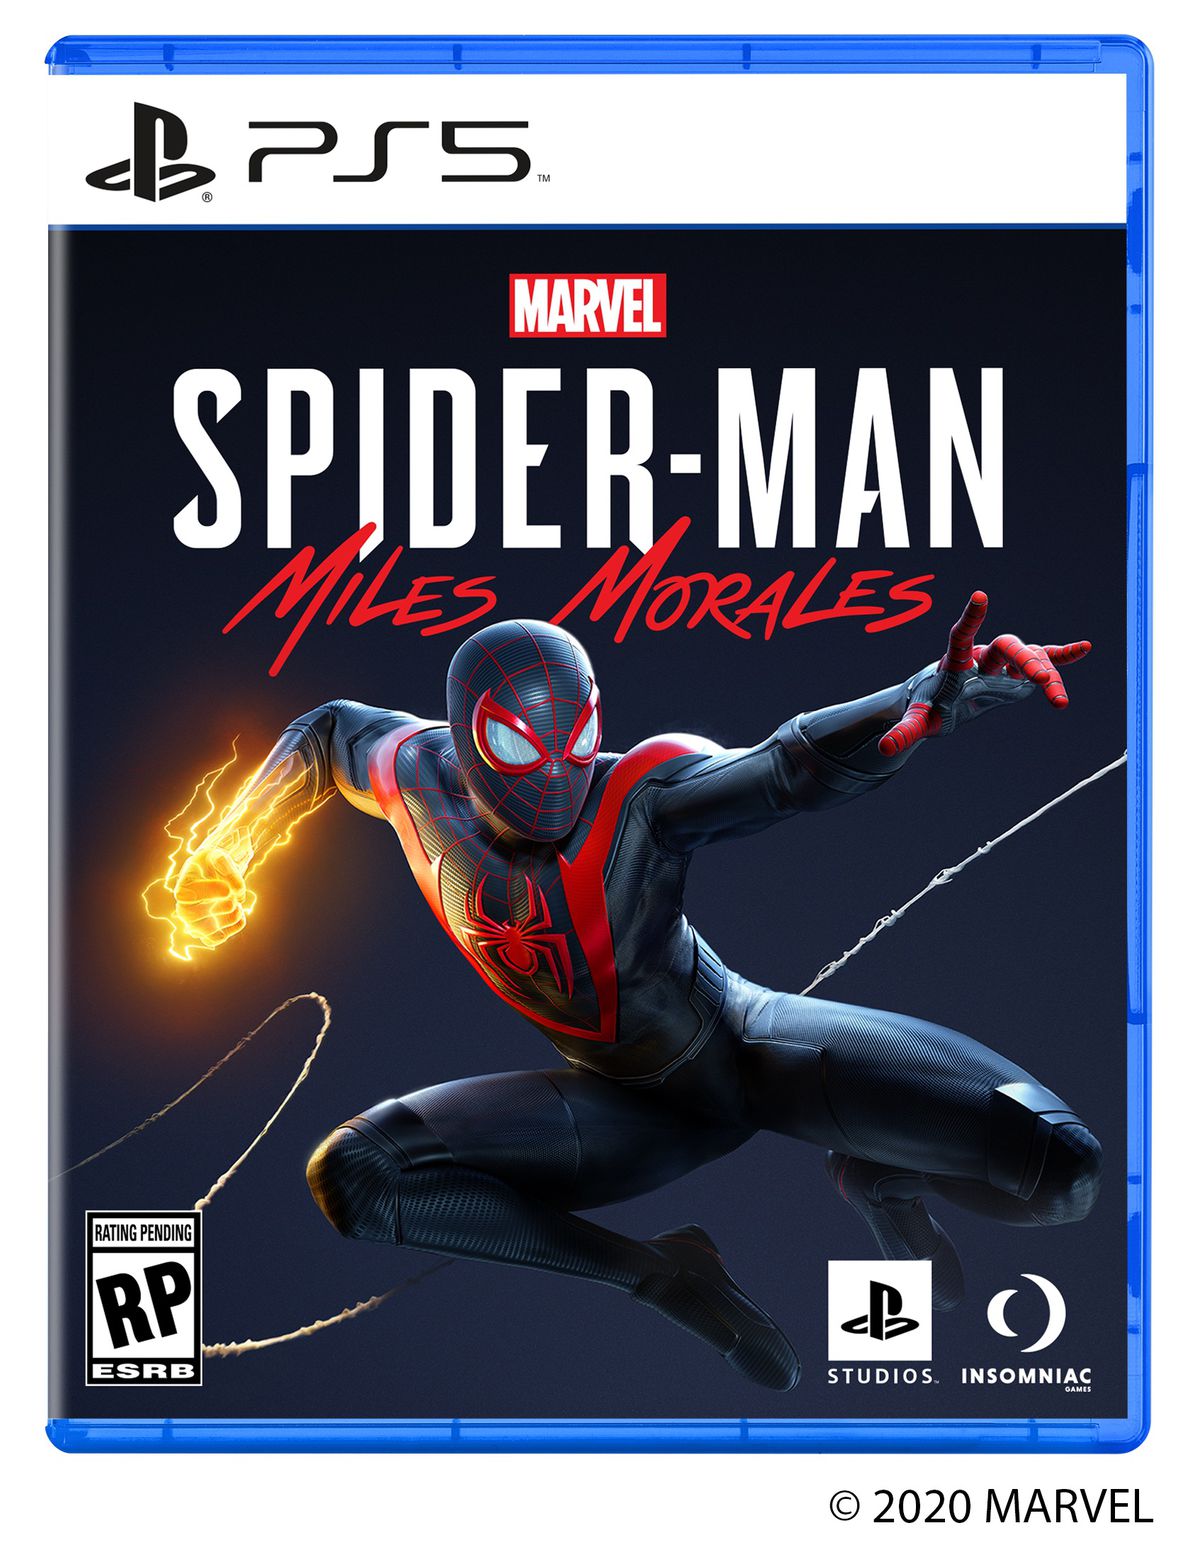 Playstation 5 First Ps5 Game Box Art For Spider Man Miles Morales